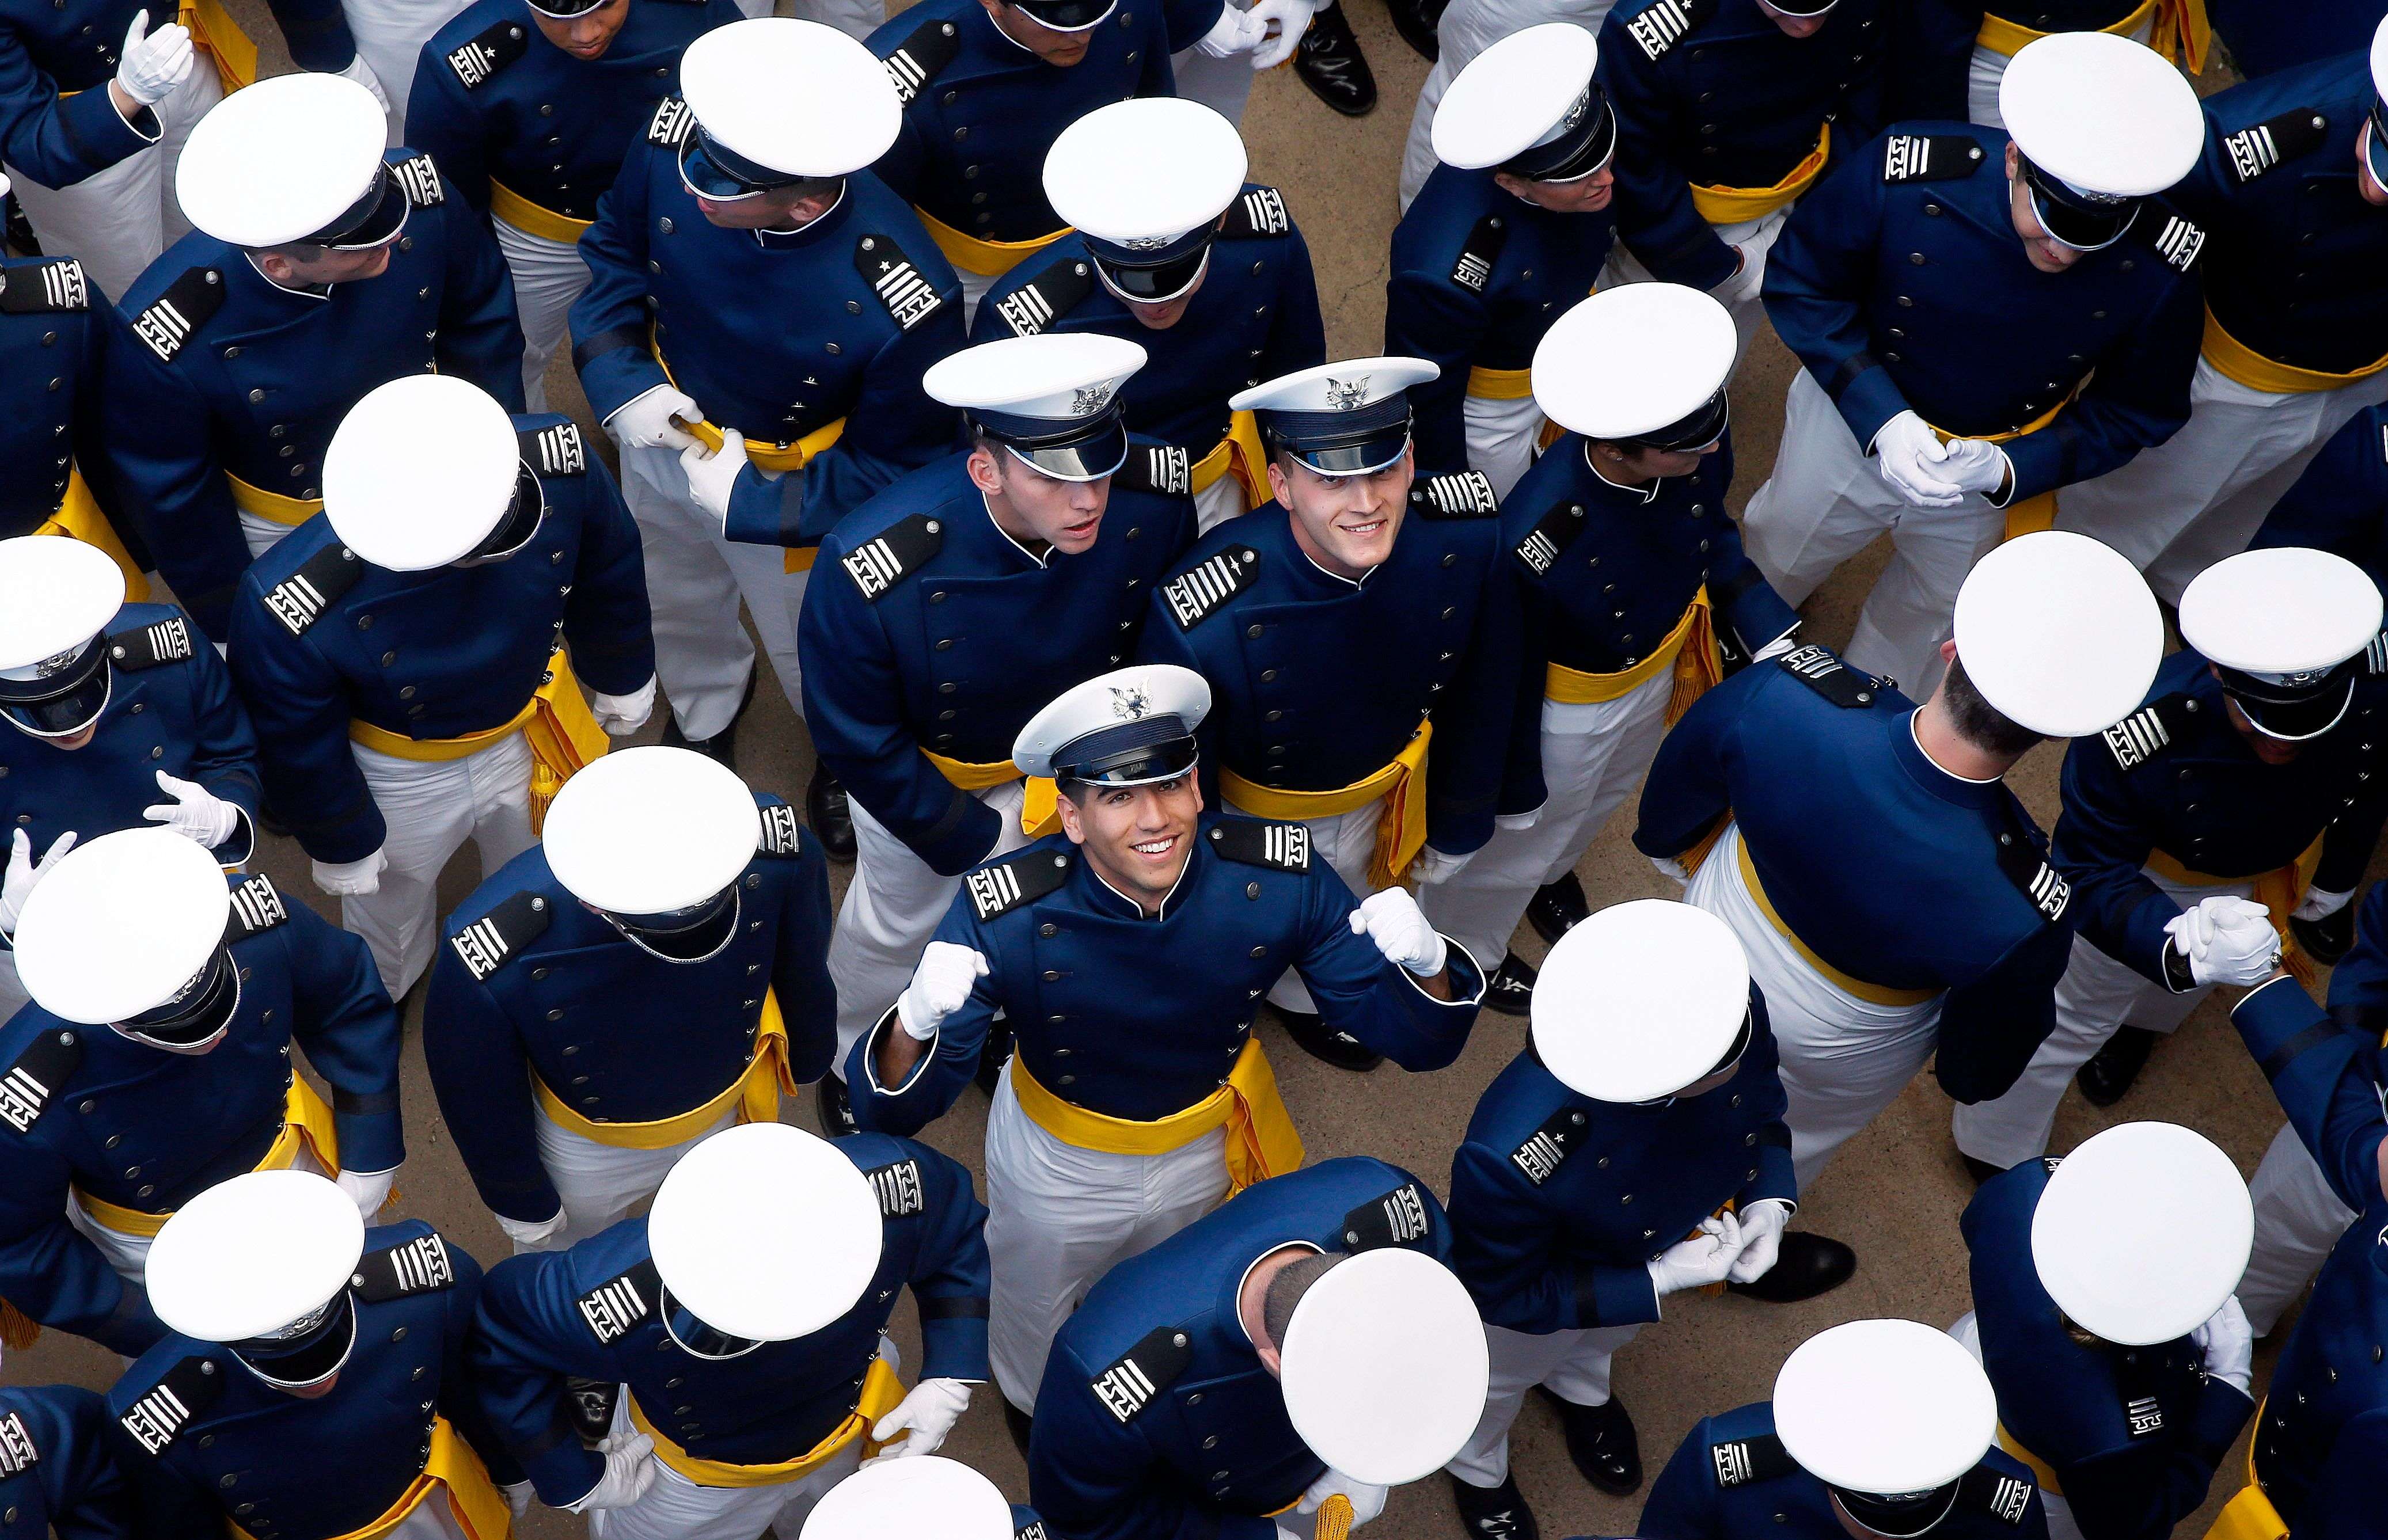 Graduating Air Force Academy cadets prepare to assemble in unison for their graduation ceremony for the class of 2015, at the U.S. Air Force Academy, in Colorado Springs, Colo.(AP/Brennan Linsley) 